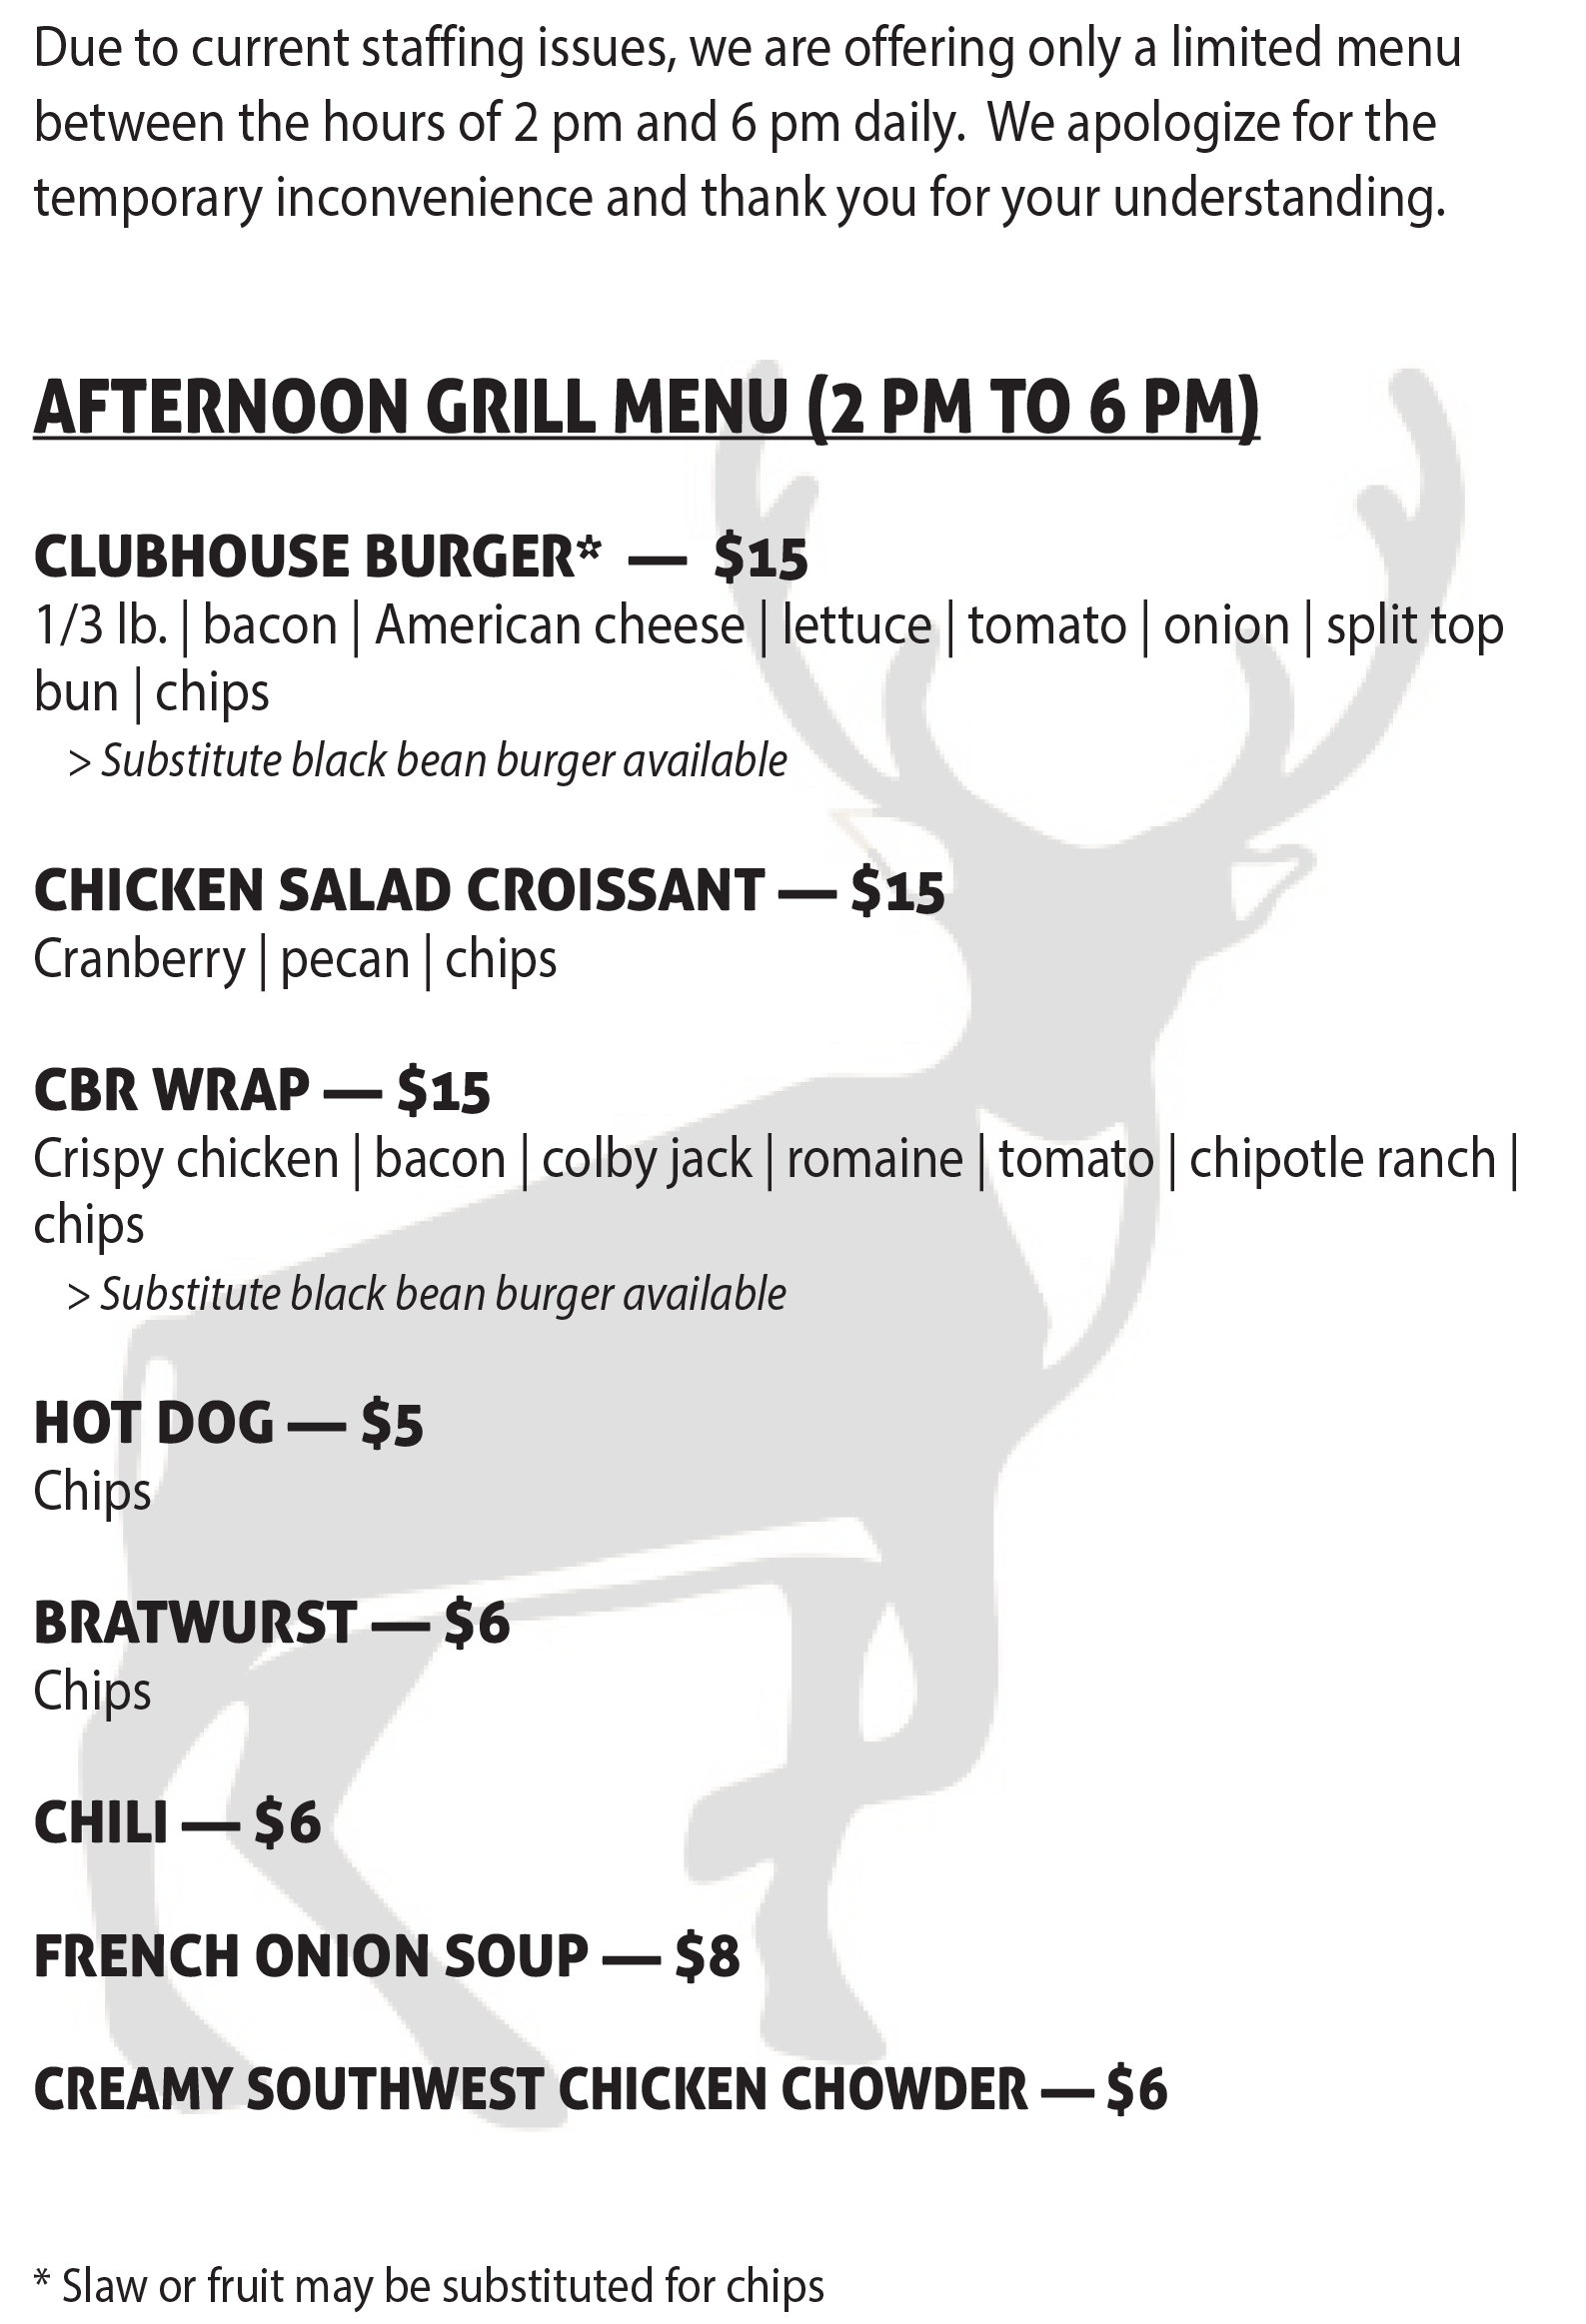 afternoon limited grill menu